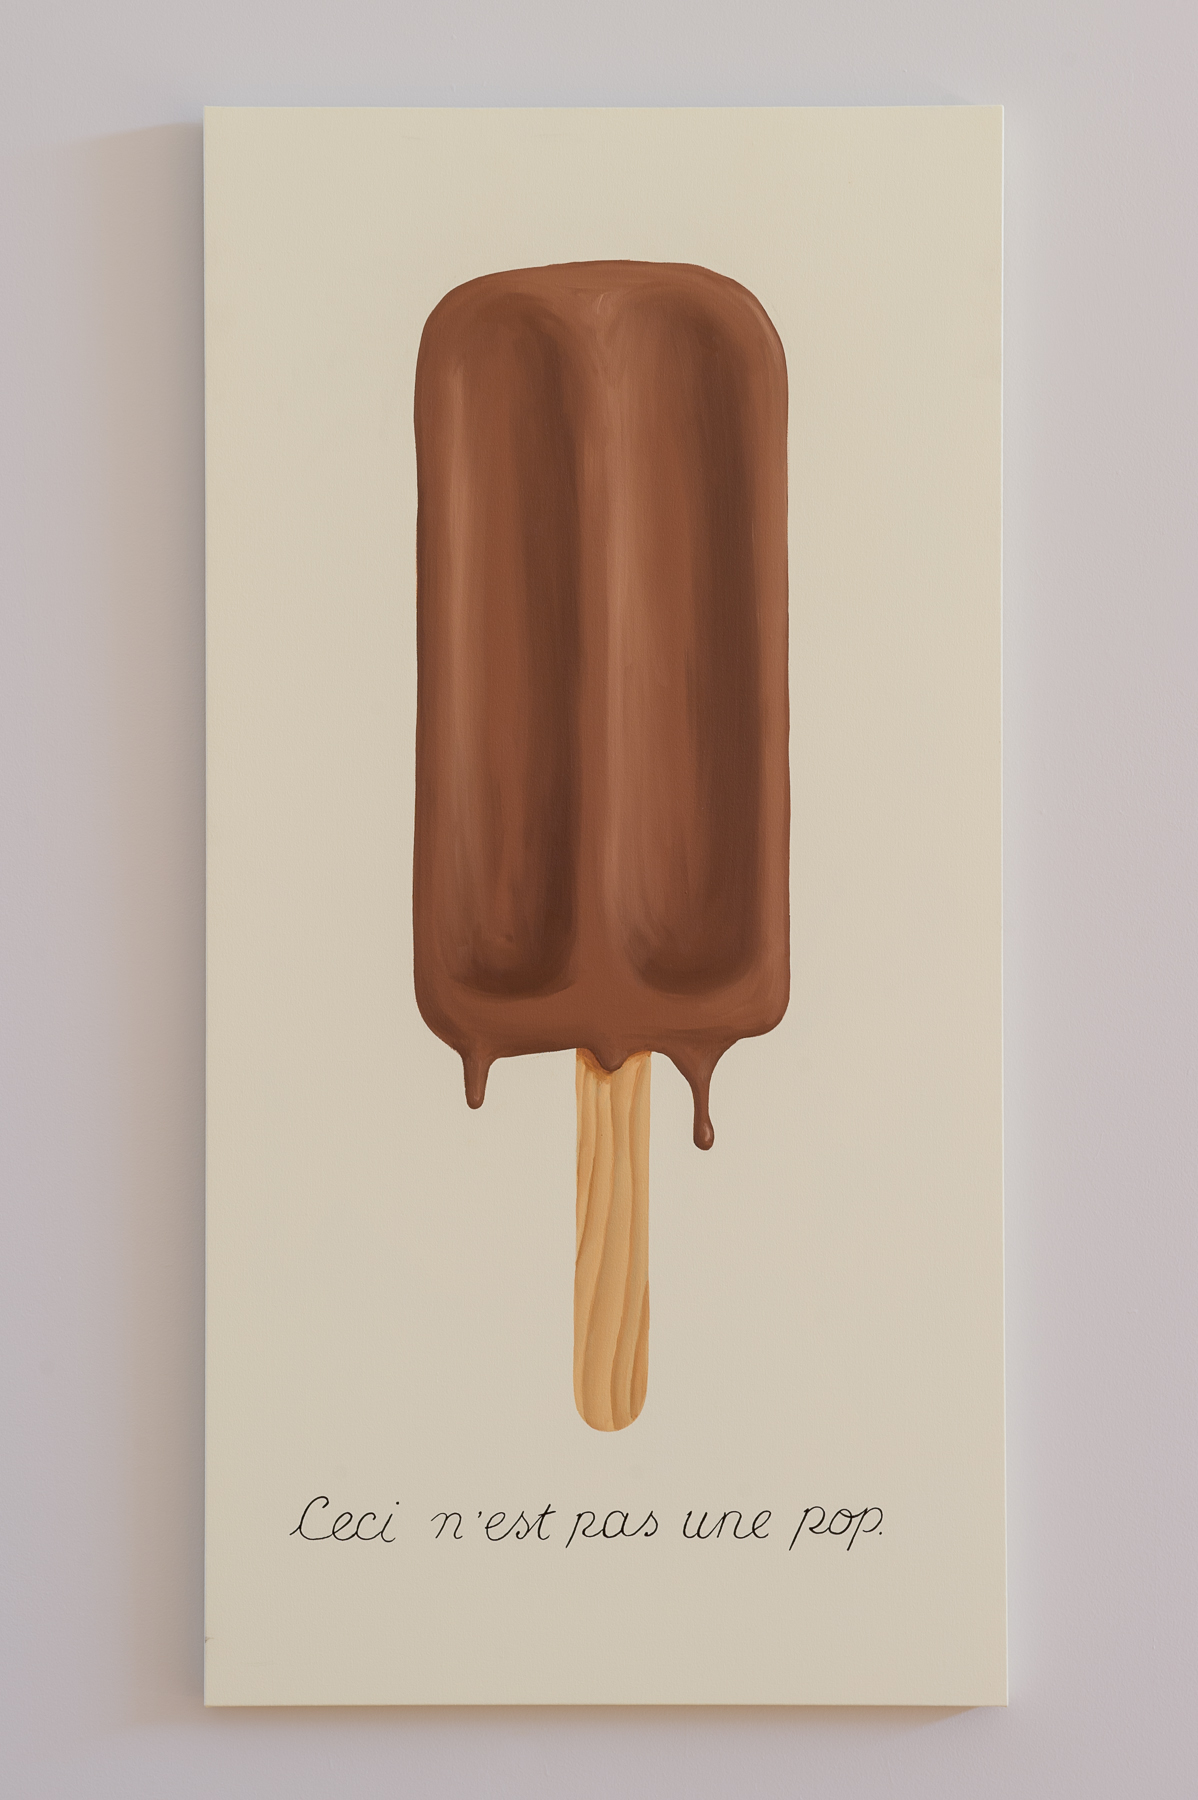 The Treachery of Pops (after Magritte)